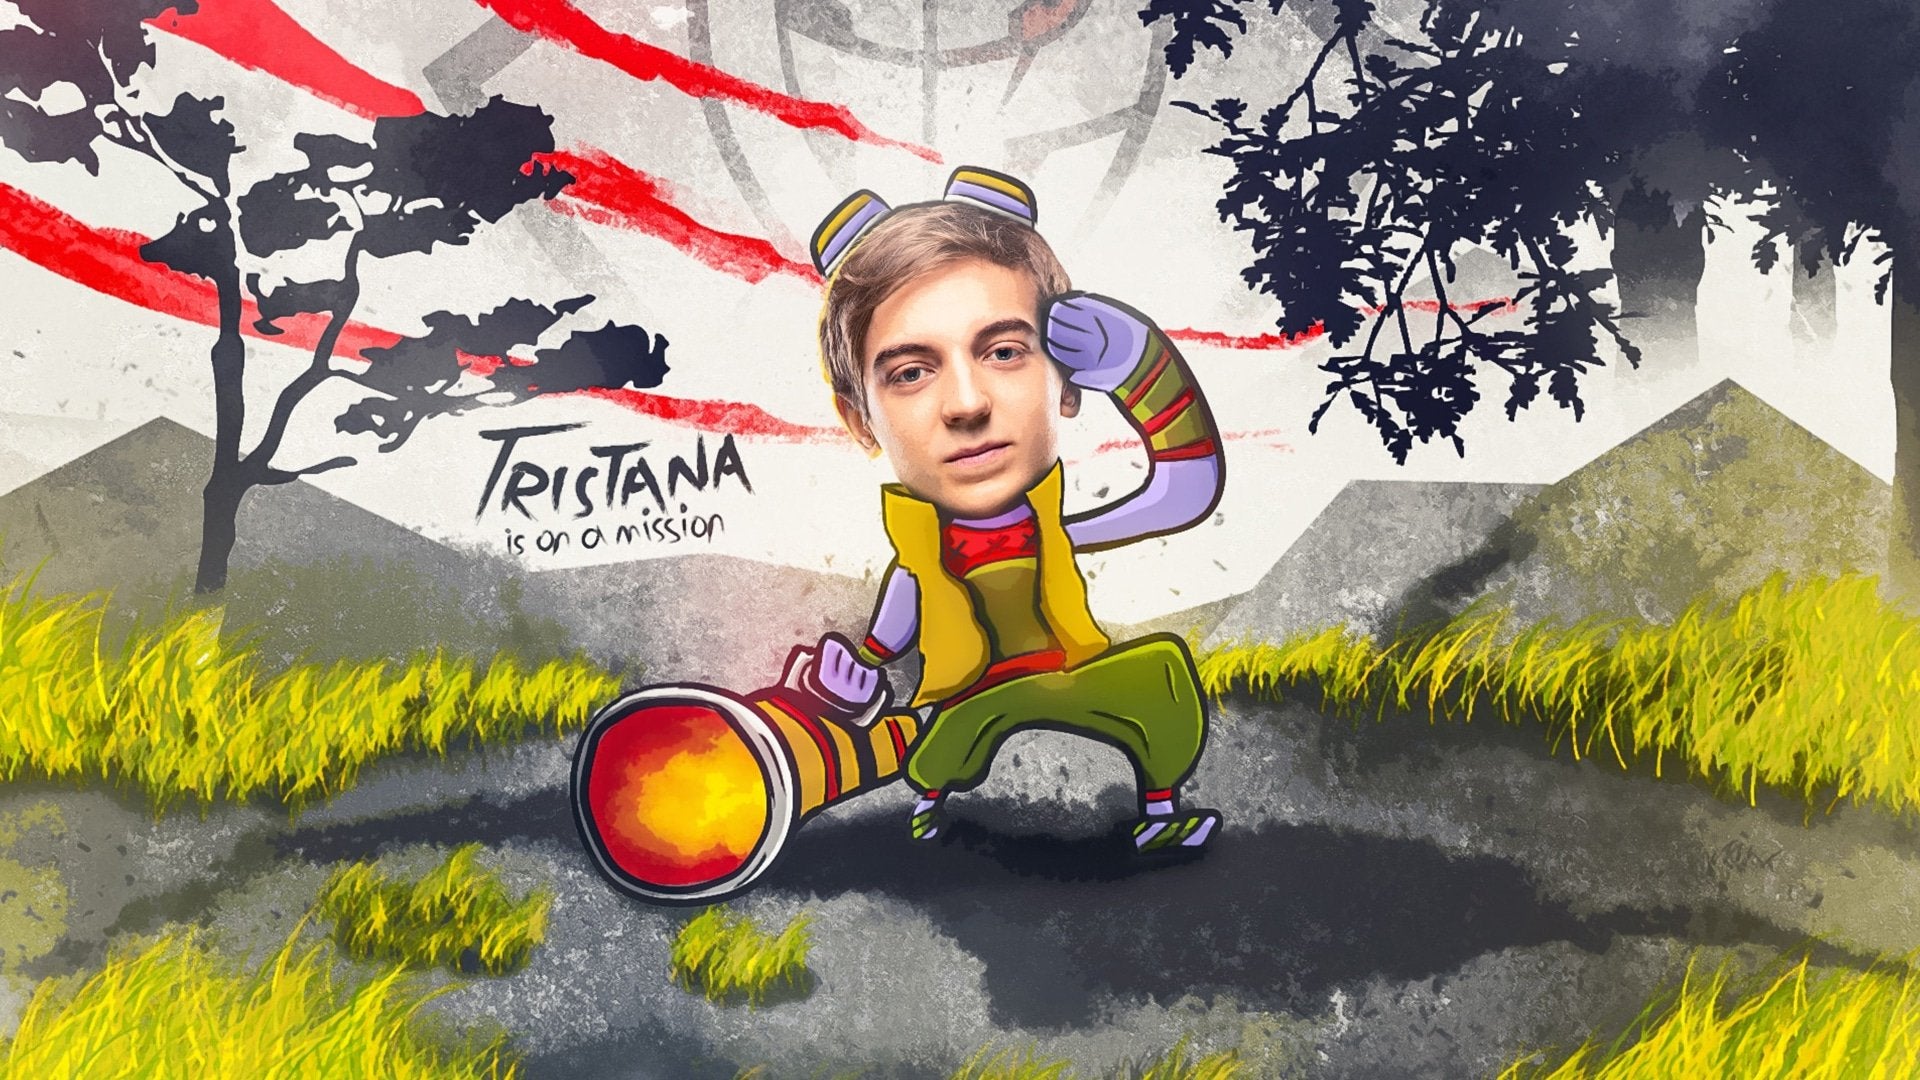 TRISTANA IS ON A MISSION